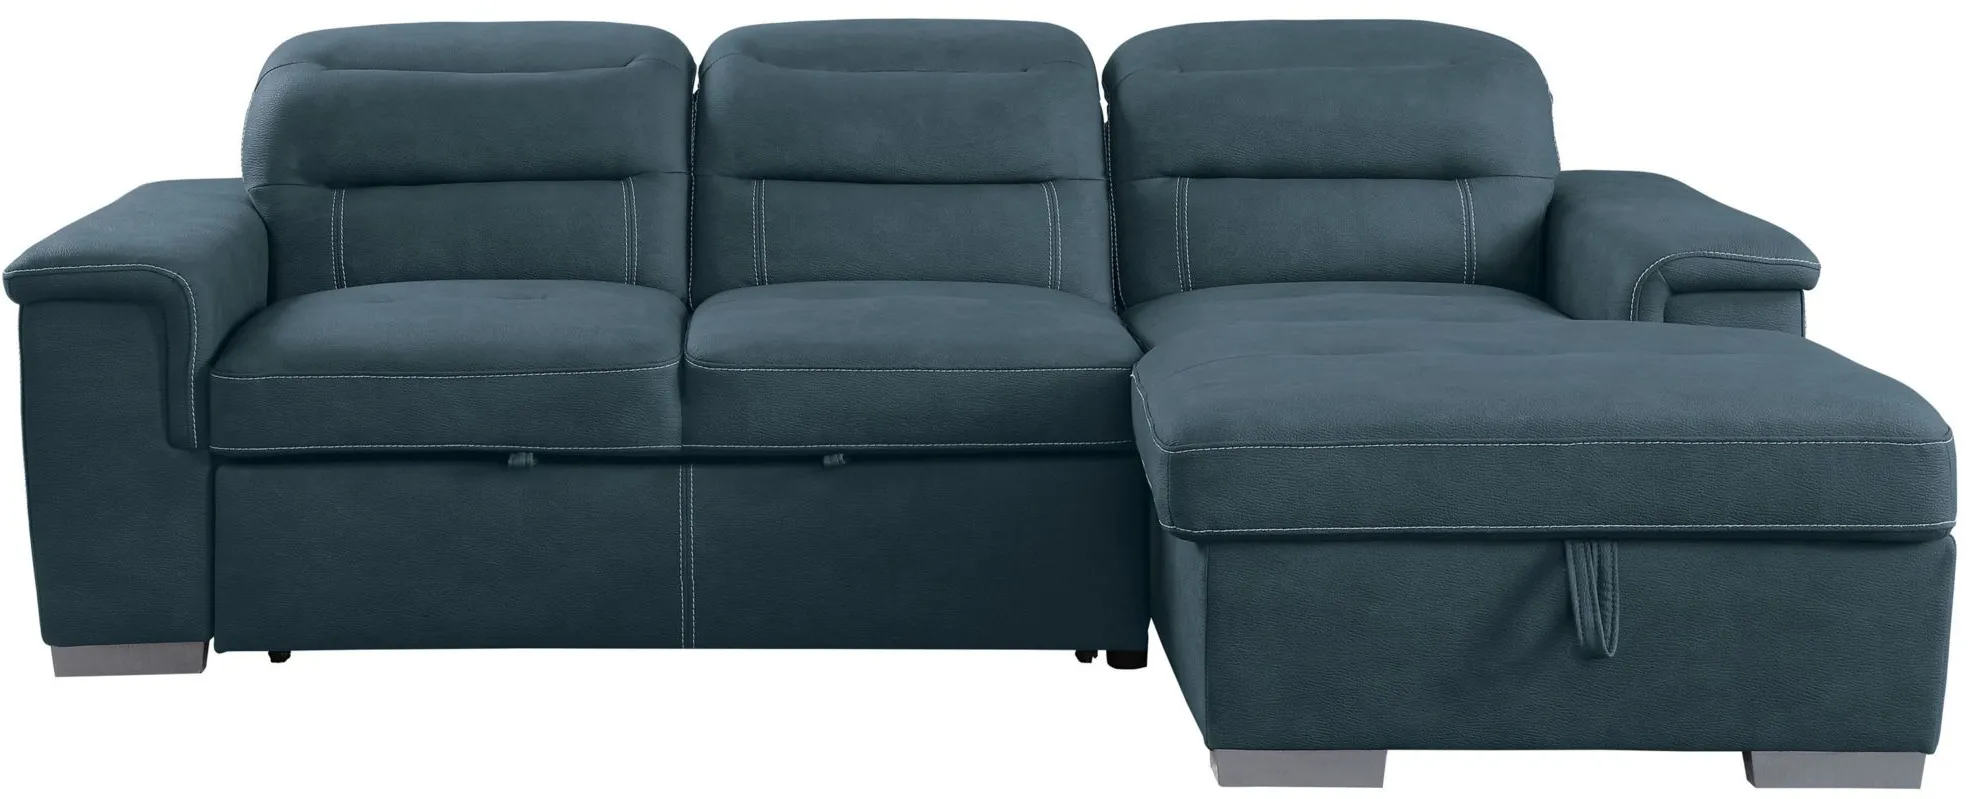 Woodland 2-pc. Sectional Sleeper Sofa w/ Storage in Blue by Homelegance